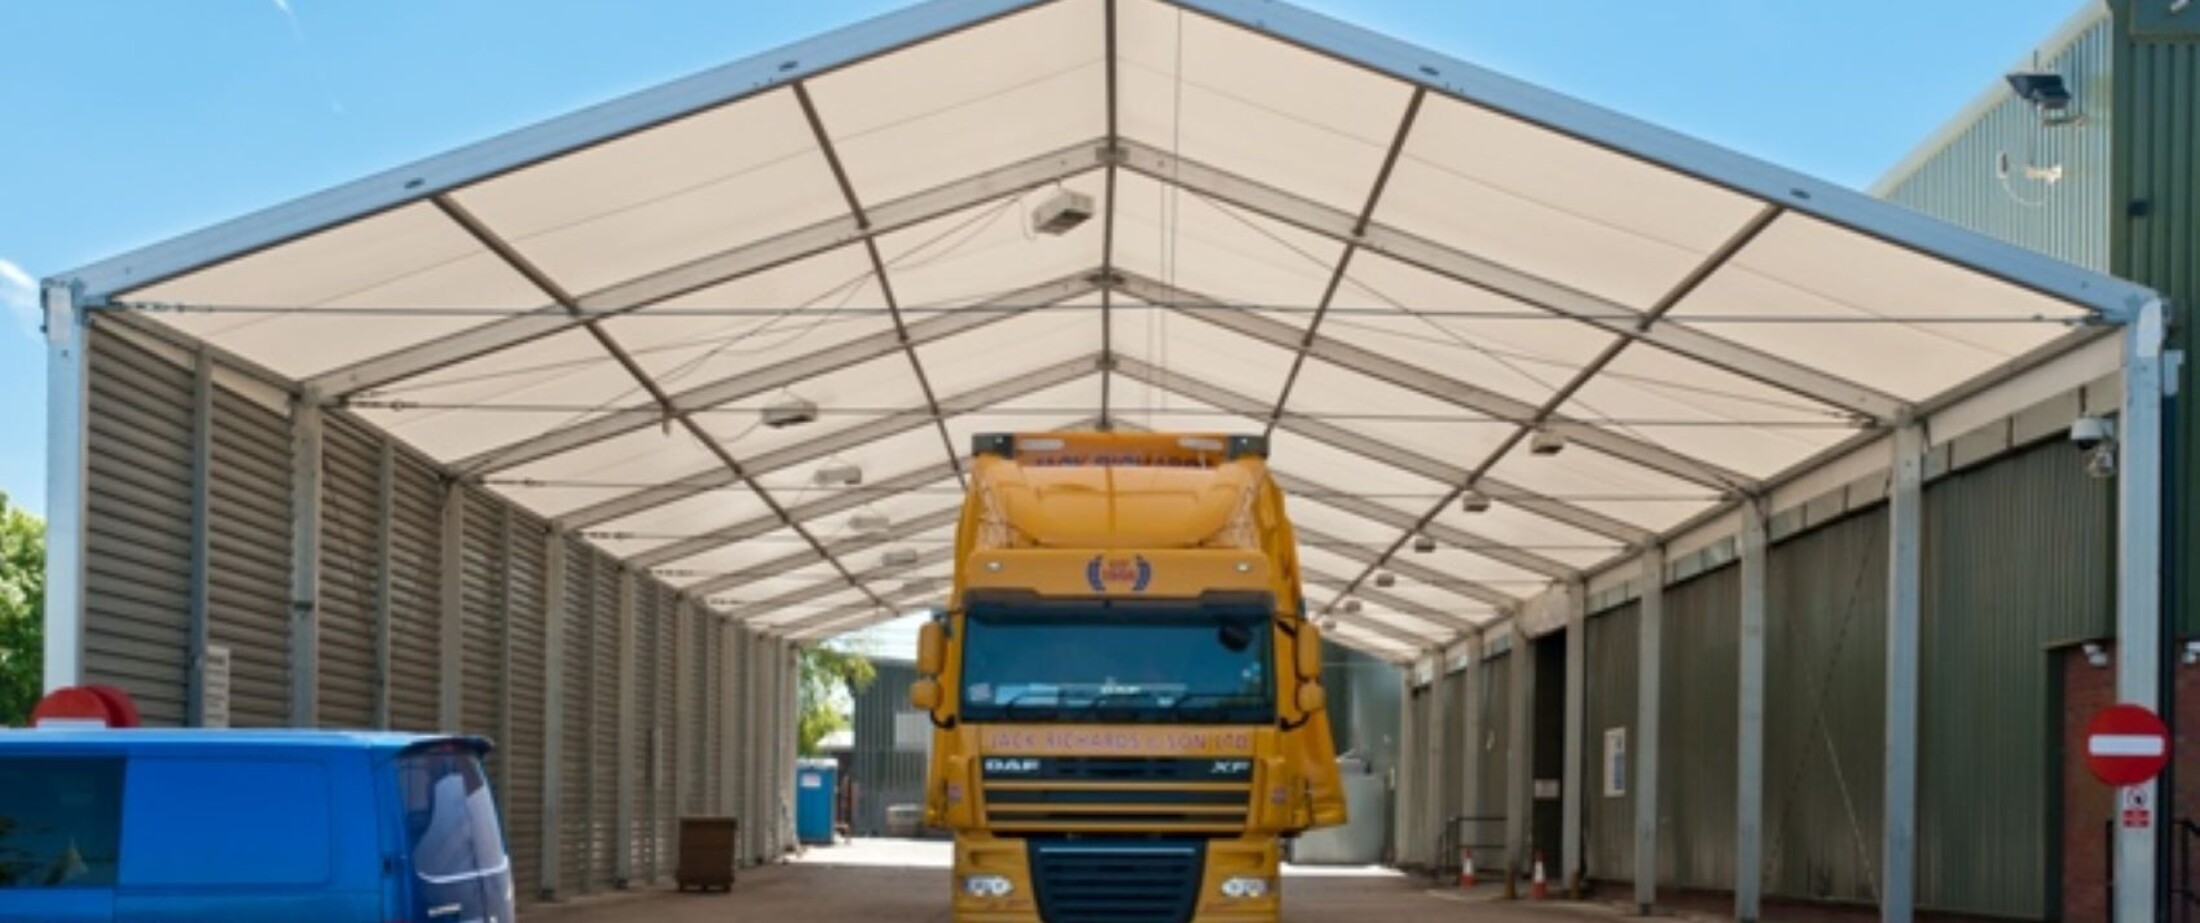 Temporary loading bay with yellow truck